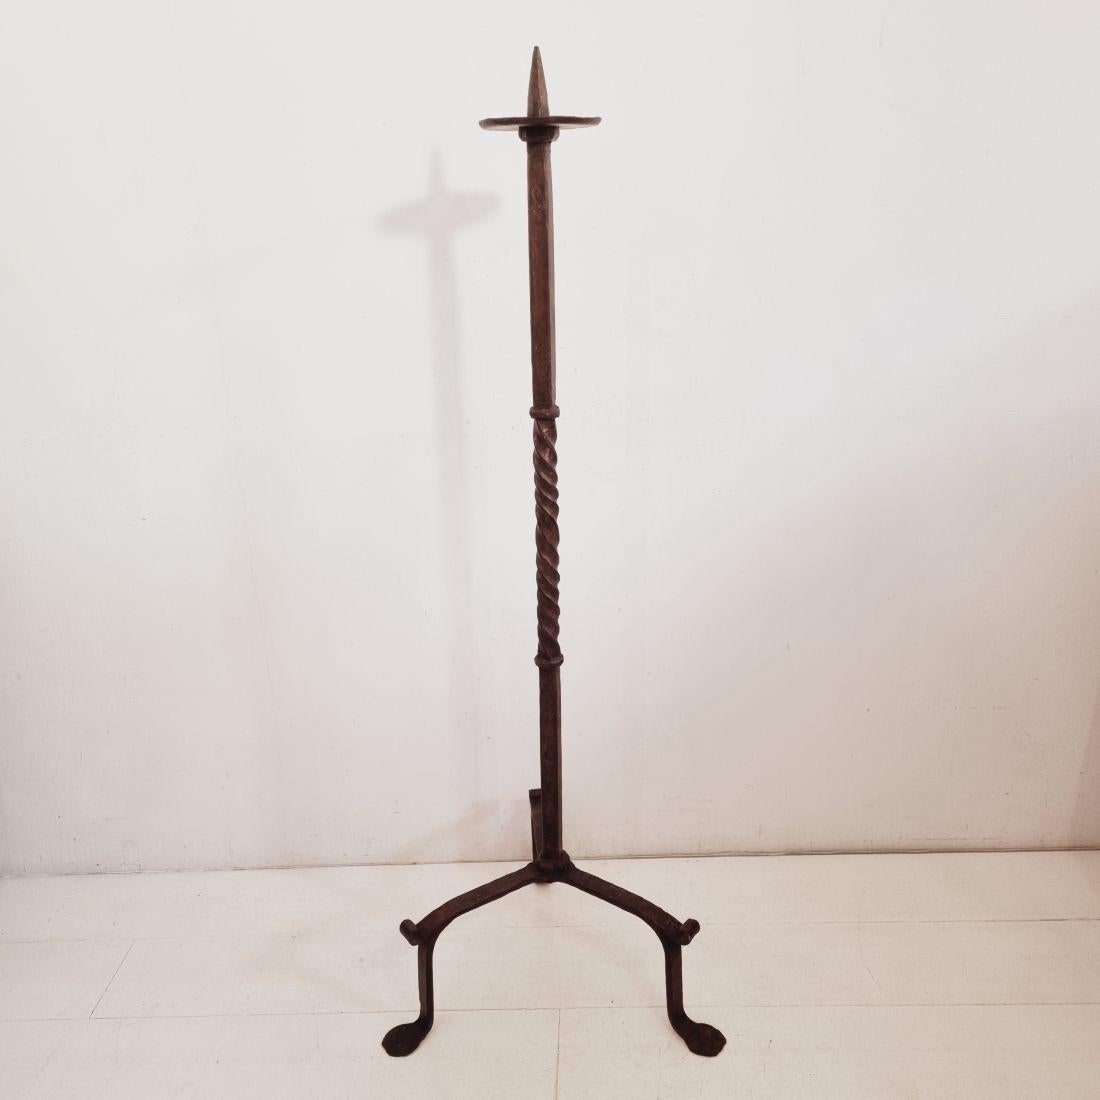 Spectacular hand forged iron candleholder with beautiful patina
France, circa 1650-1750
Good but weathered condition.